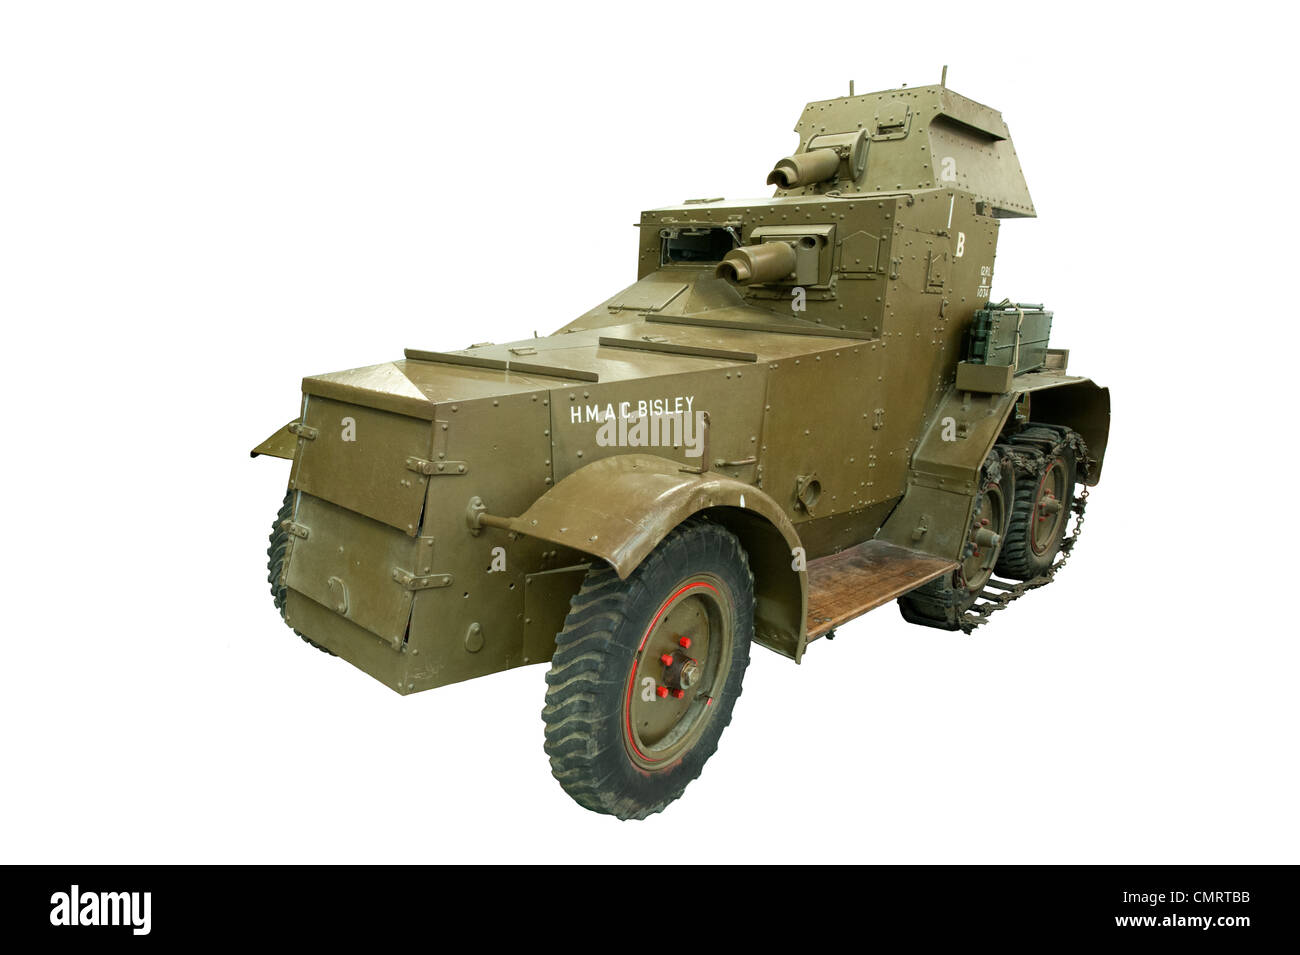 A cut out of a Crossley Mk 1 Half Tracked Armoured Car used by British forces during WW2 Stock Photo